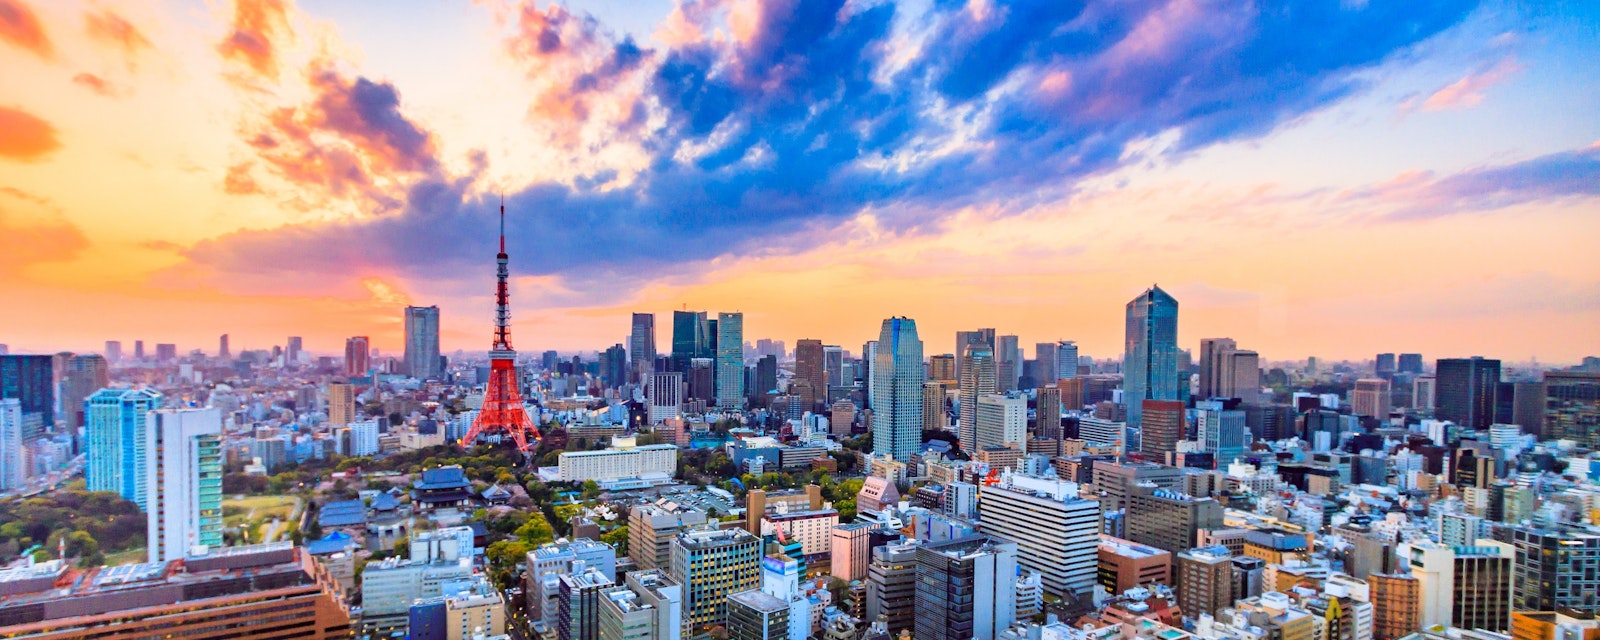 Cityscapes,View,Sunset,Of,Tokyo,City,Japan